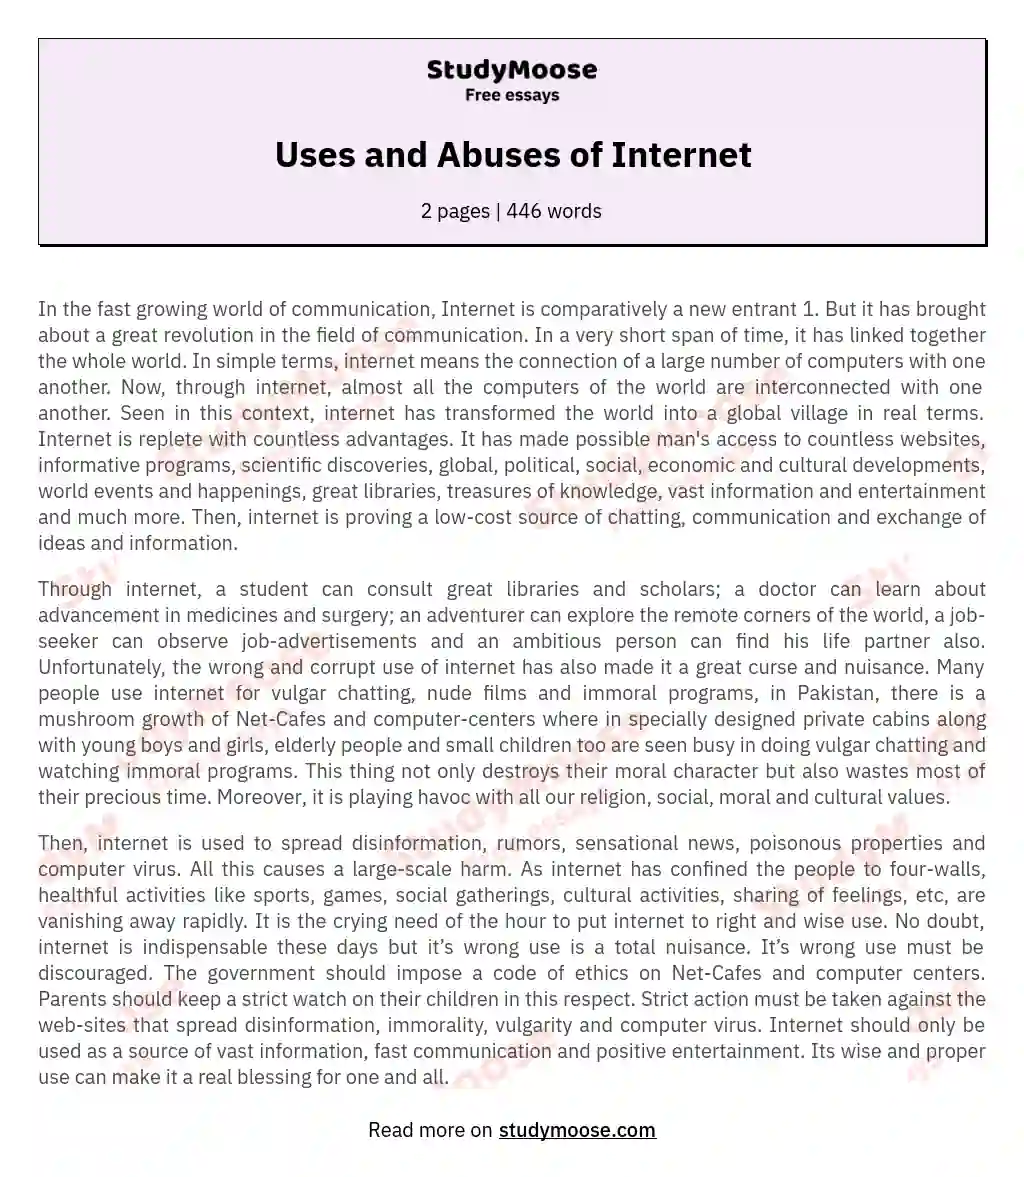 uses and abuses of internet essay 100 words